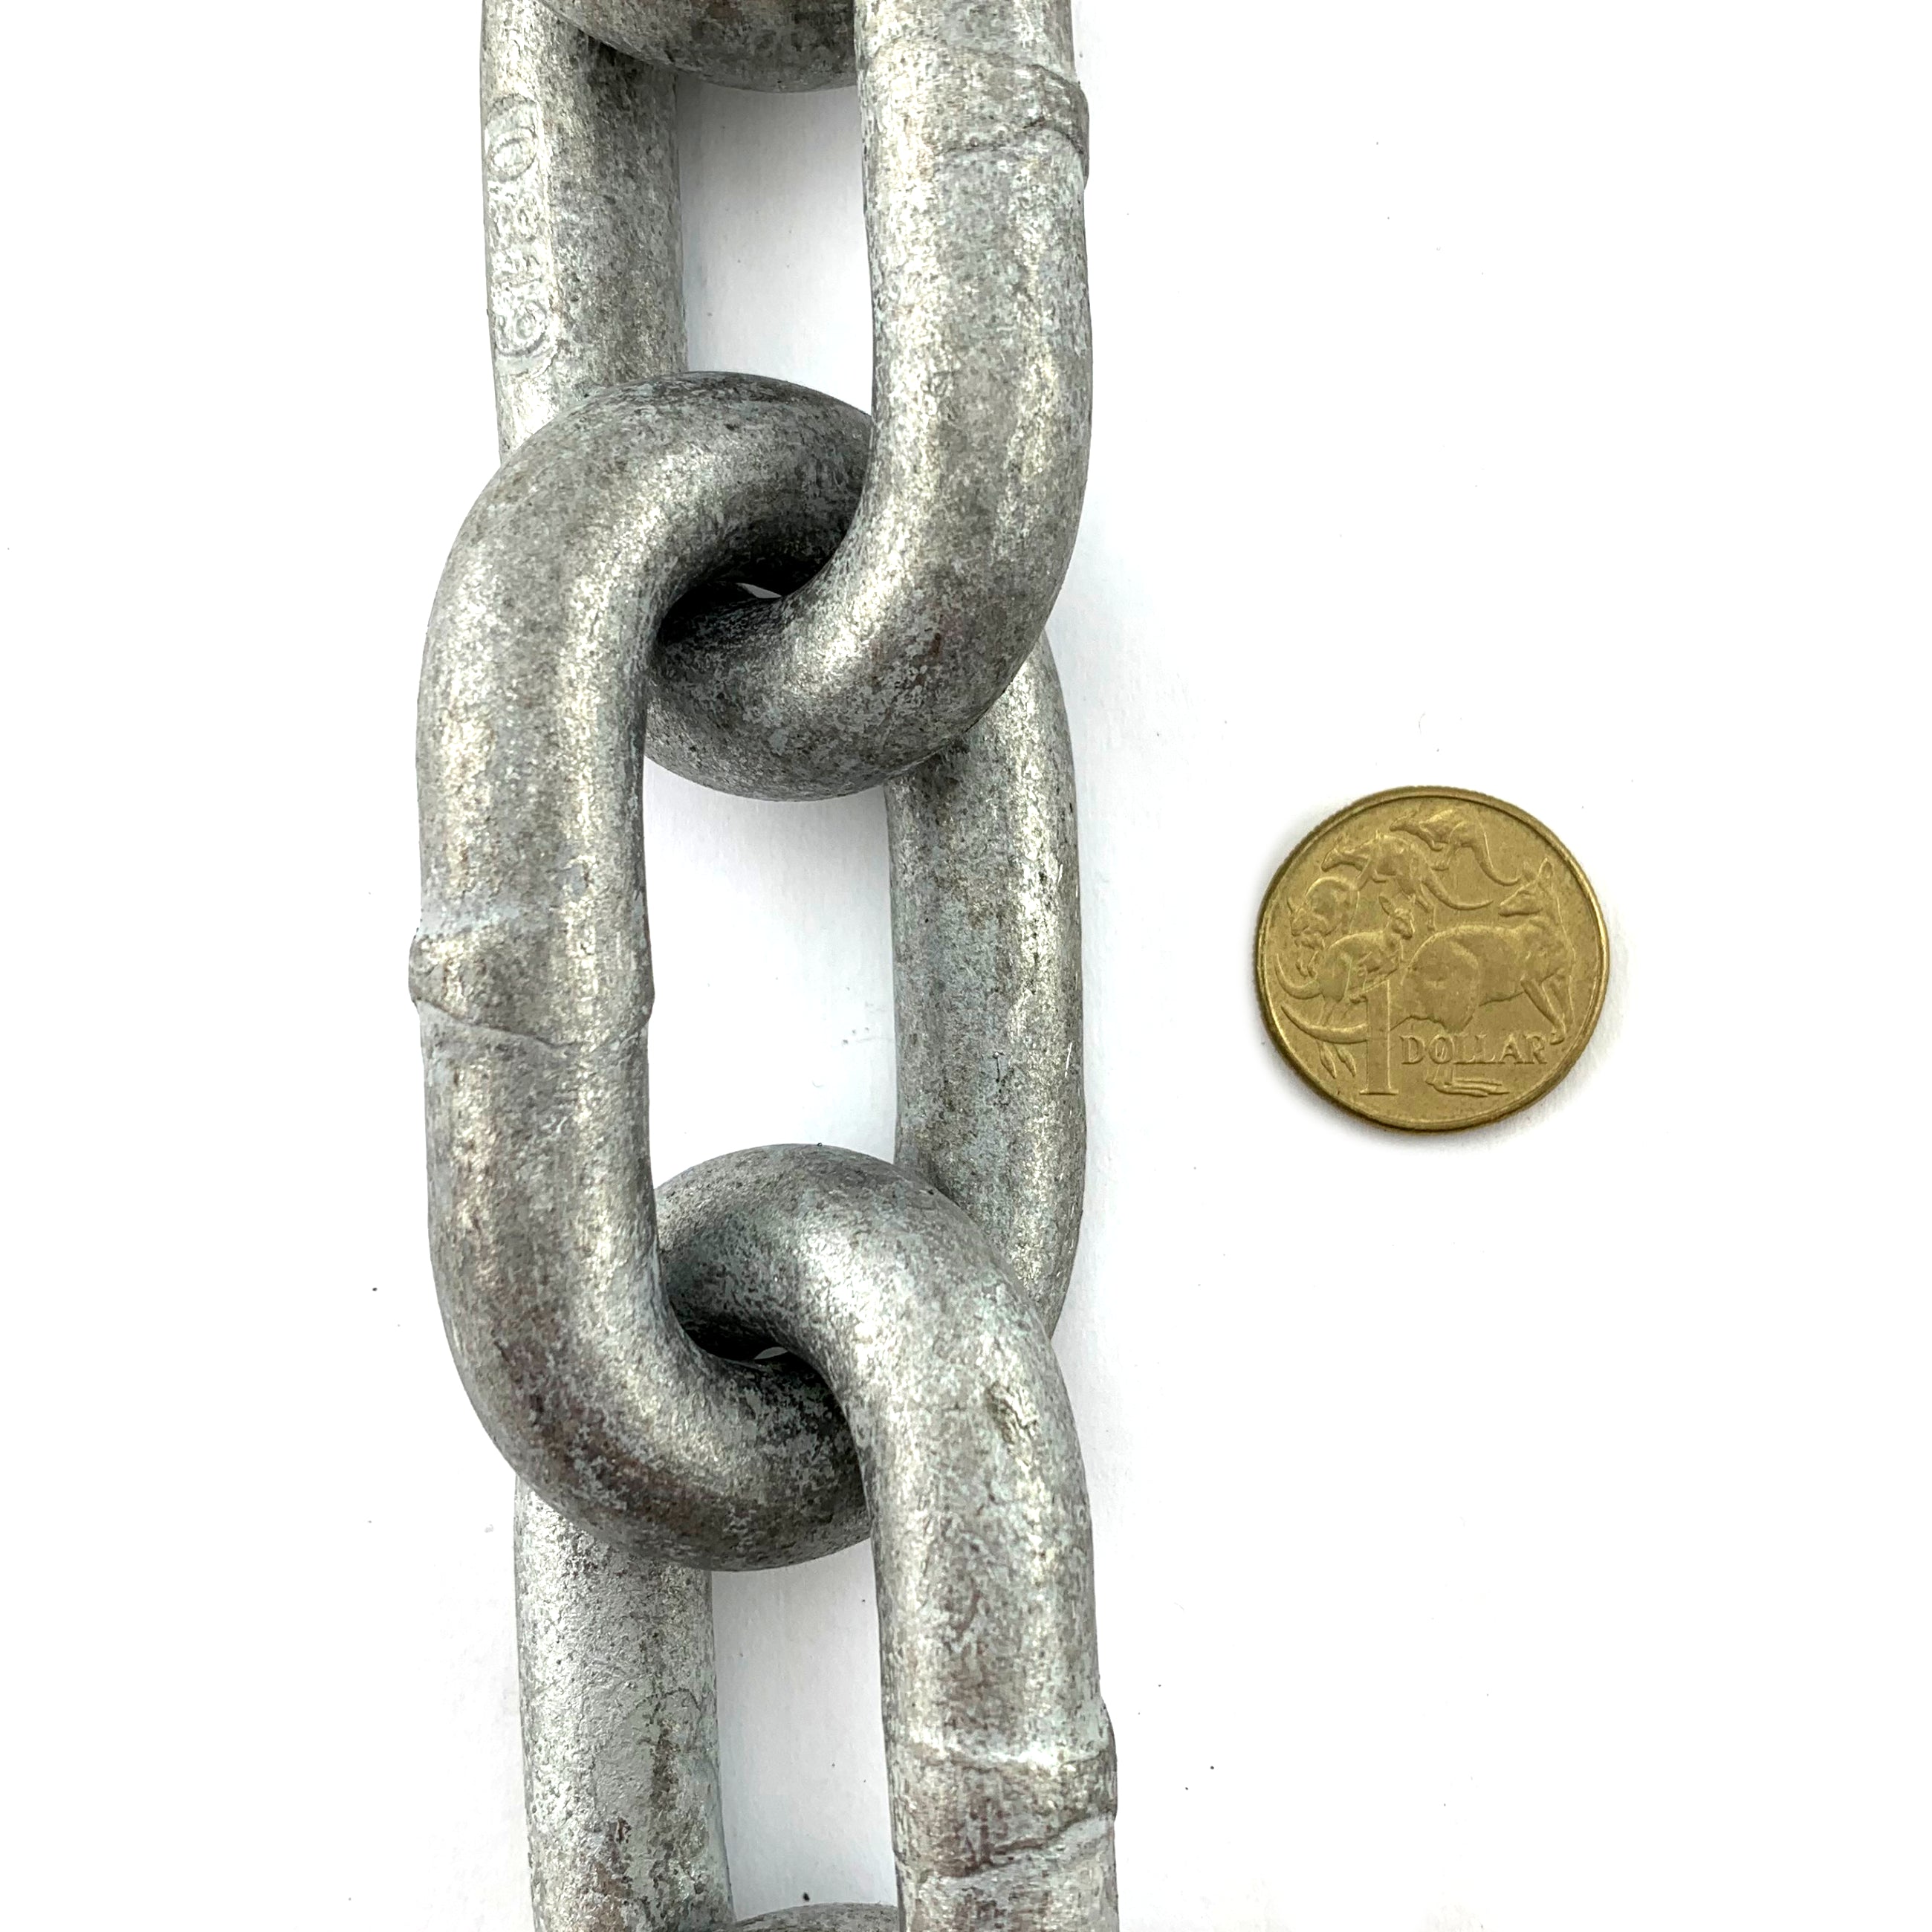 AS 13mm long link galvanised trailer chain. Order by the metre. Melbourne, Australia